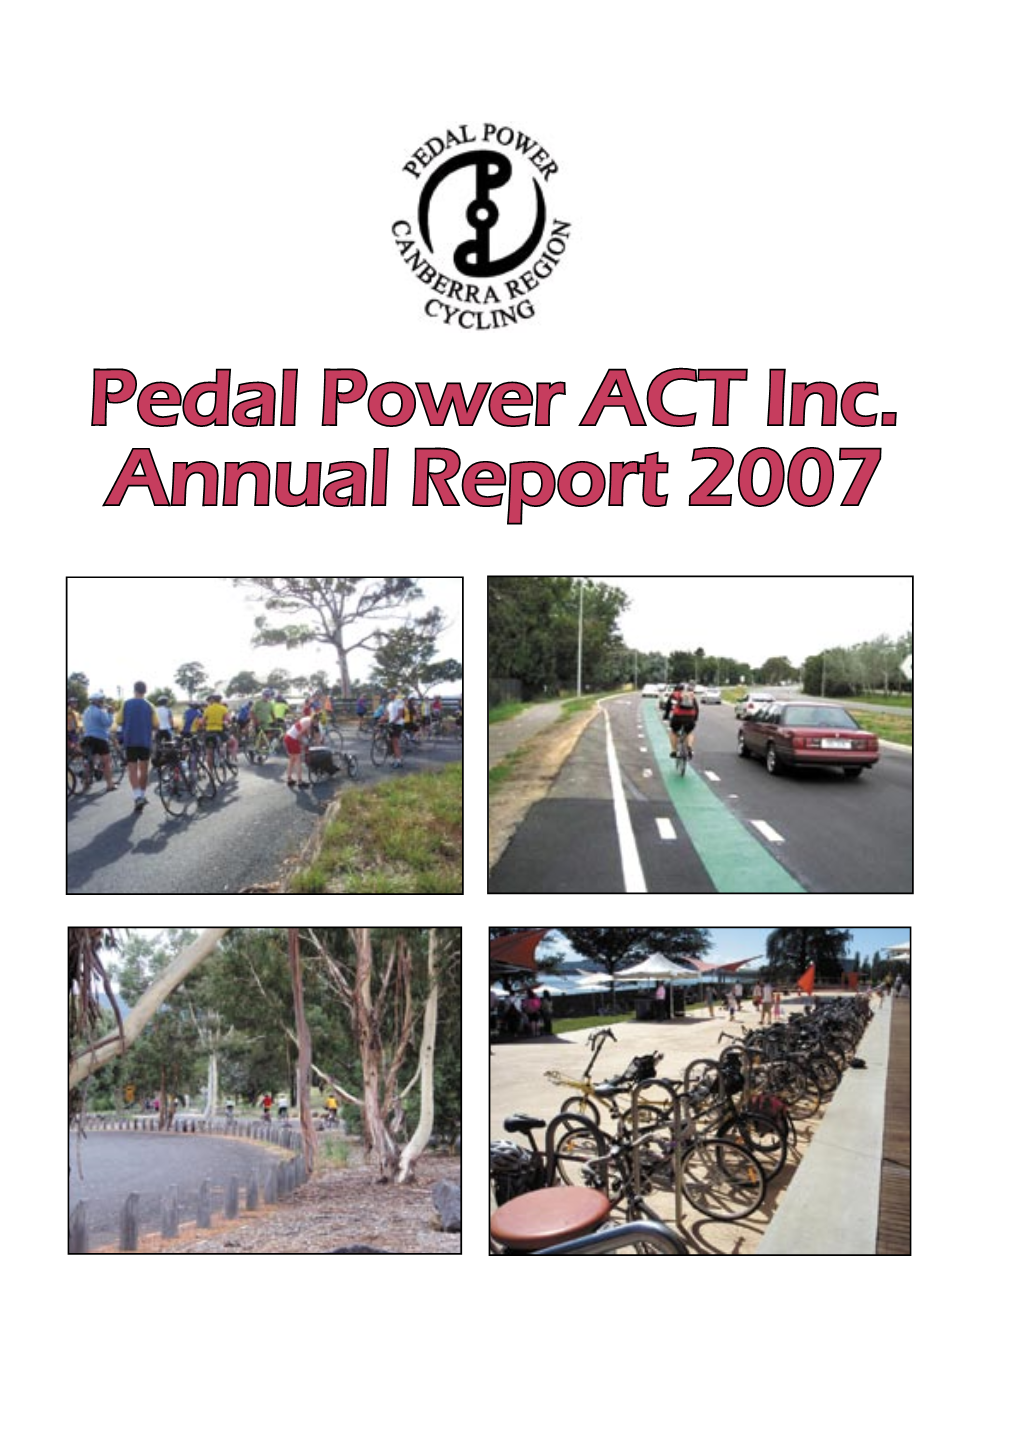 Pedal Power ACT Inc. Annual Report 2007 ��������������������������������������